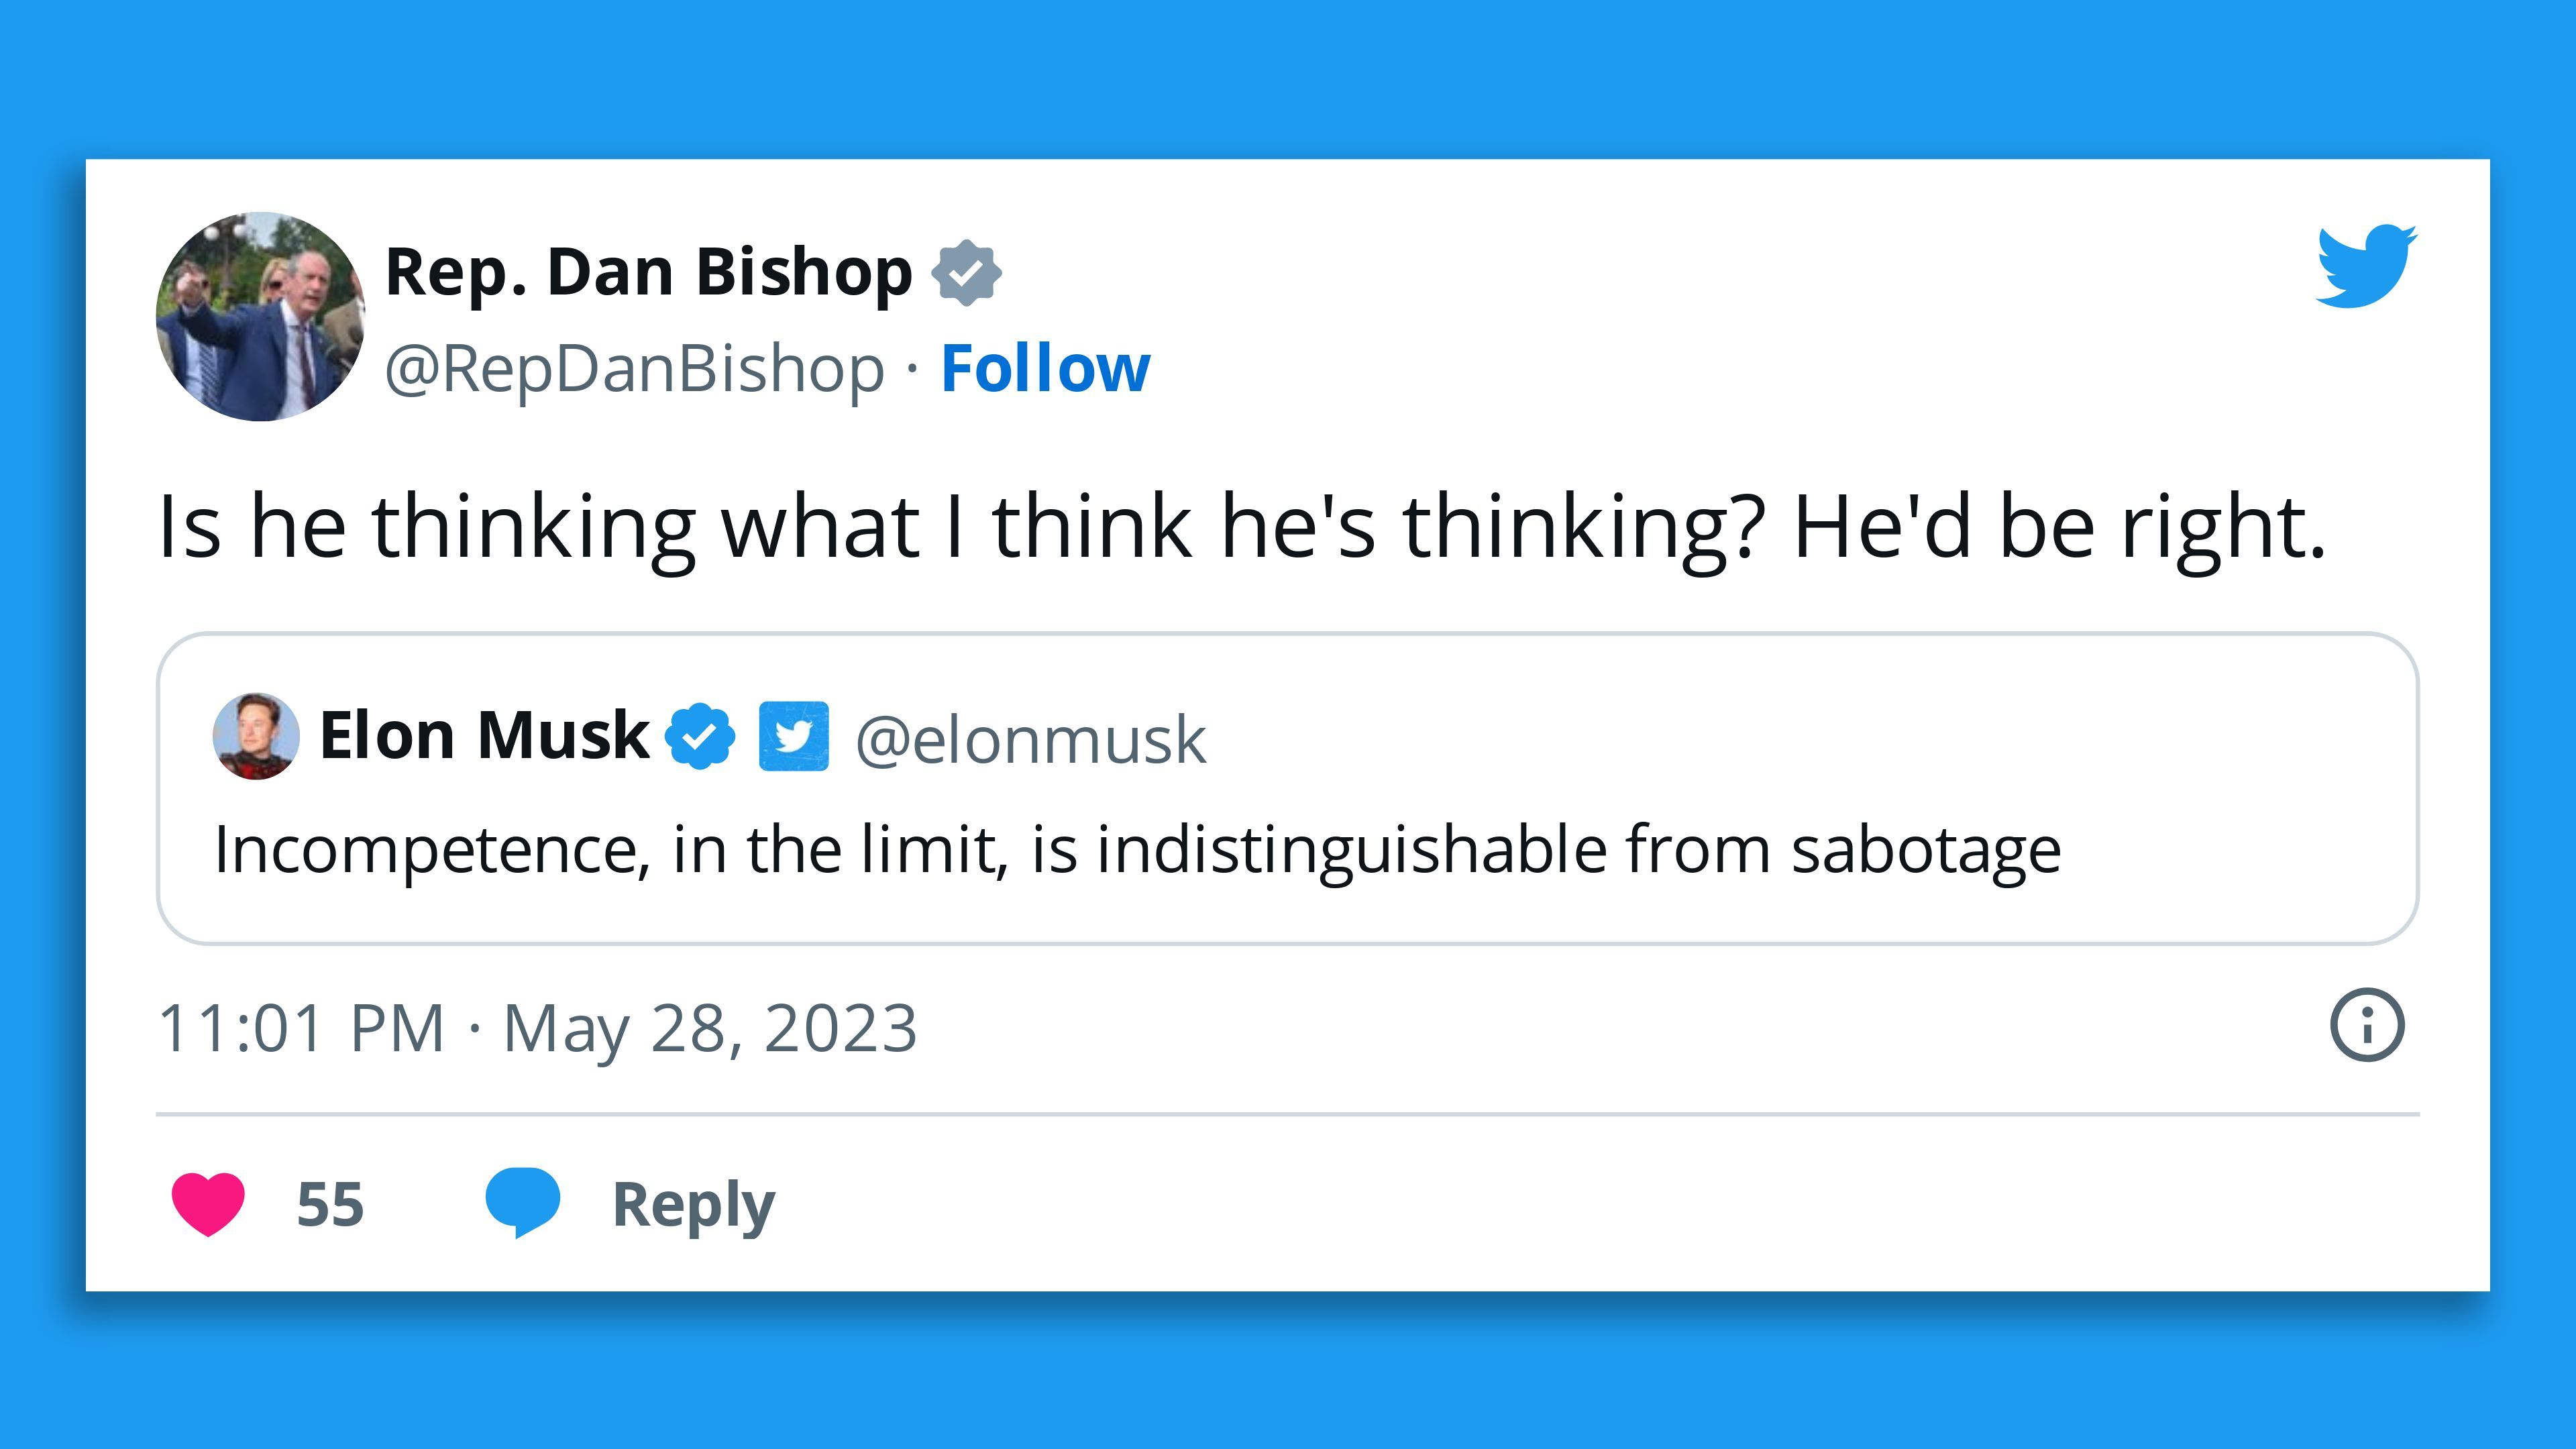 A  screenshot of a retweet of Elon Musk's tweet saying "Incompetence, in the limit, is indistinguishable from sabotage" by Rep. Dan Bishop with the comment: "Is he thinking what I think he's thinking? He'd be right."